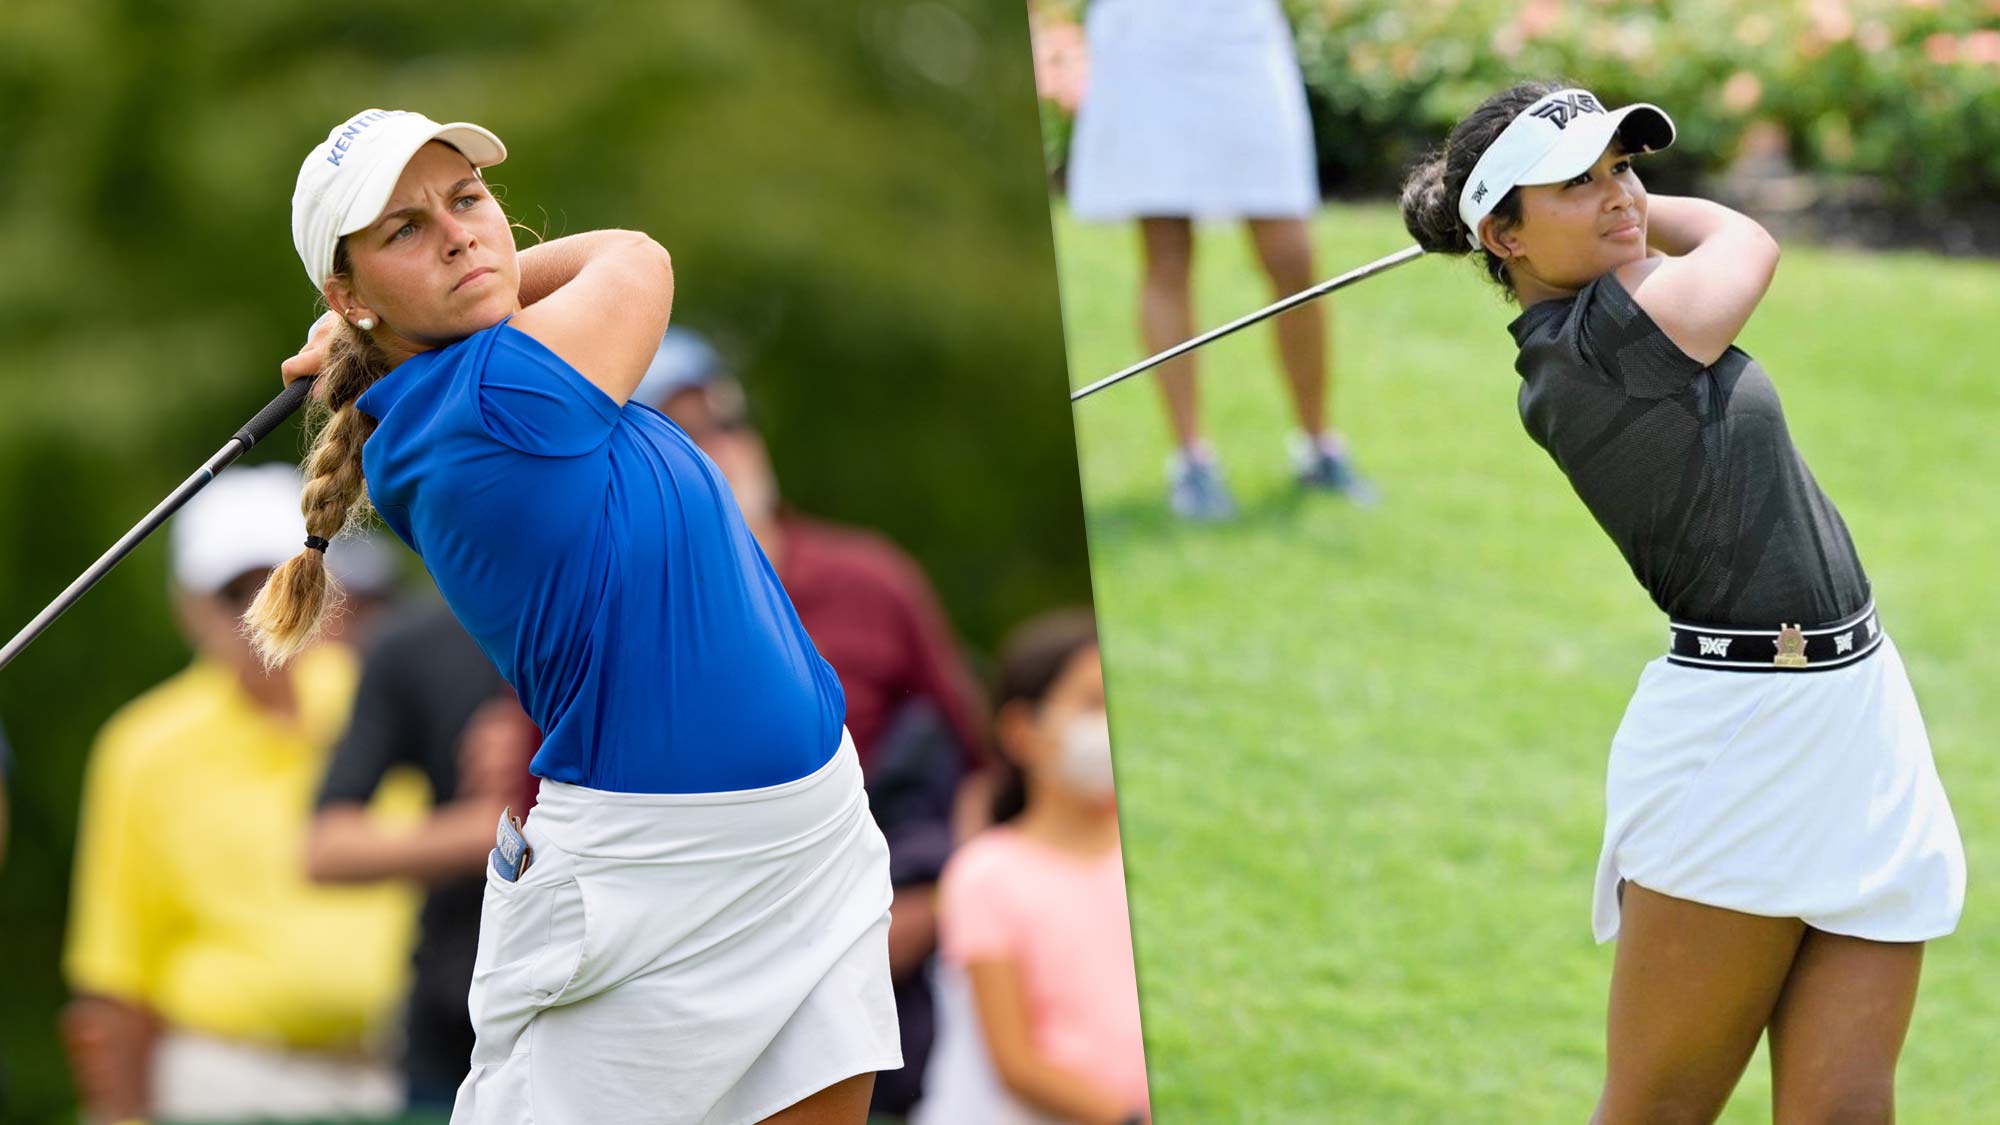 Jensen Castle and Amari Avery Earn Exemptions into LPGAs Cognizant Founders Cup LPGA Ladies Professional Golf Association